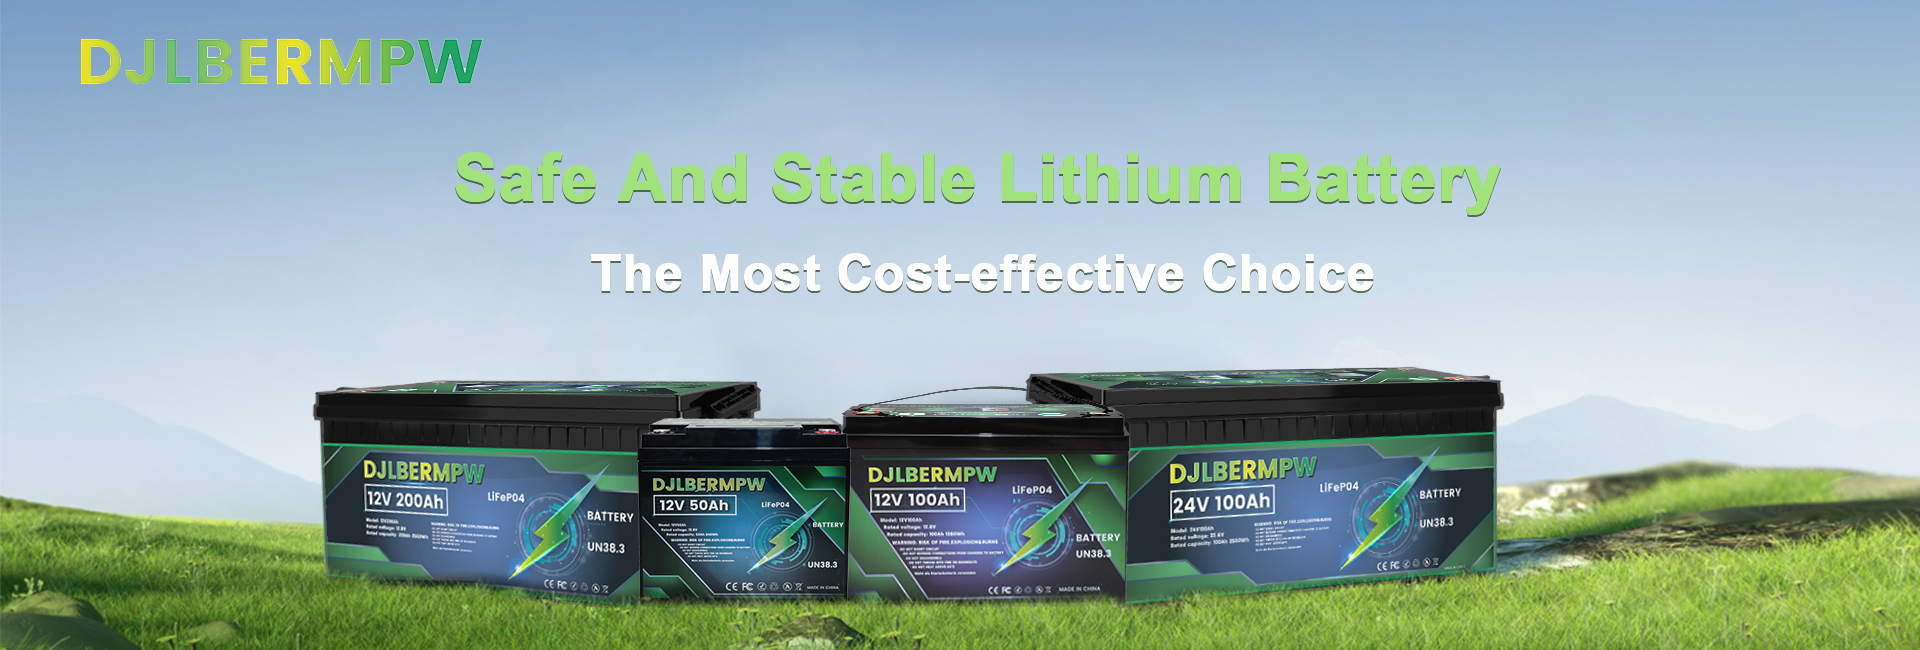 DJLBERMPW & Provides safe and stable lithium batteries for easy life!